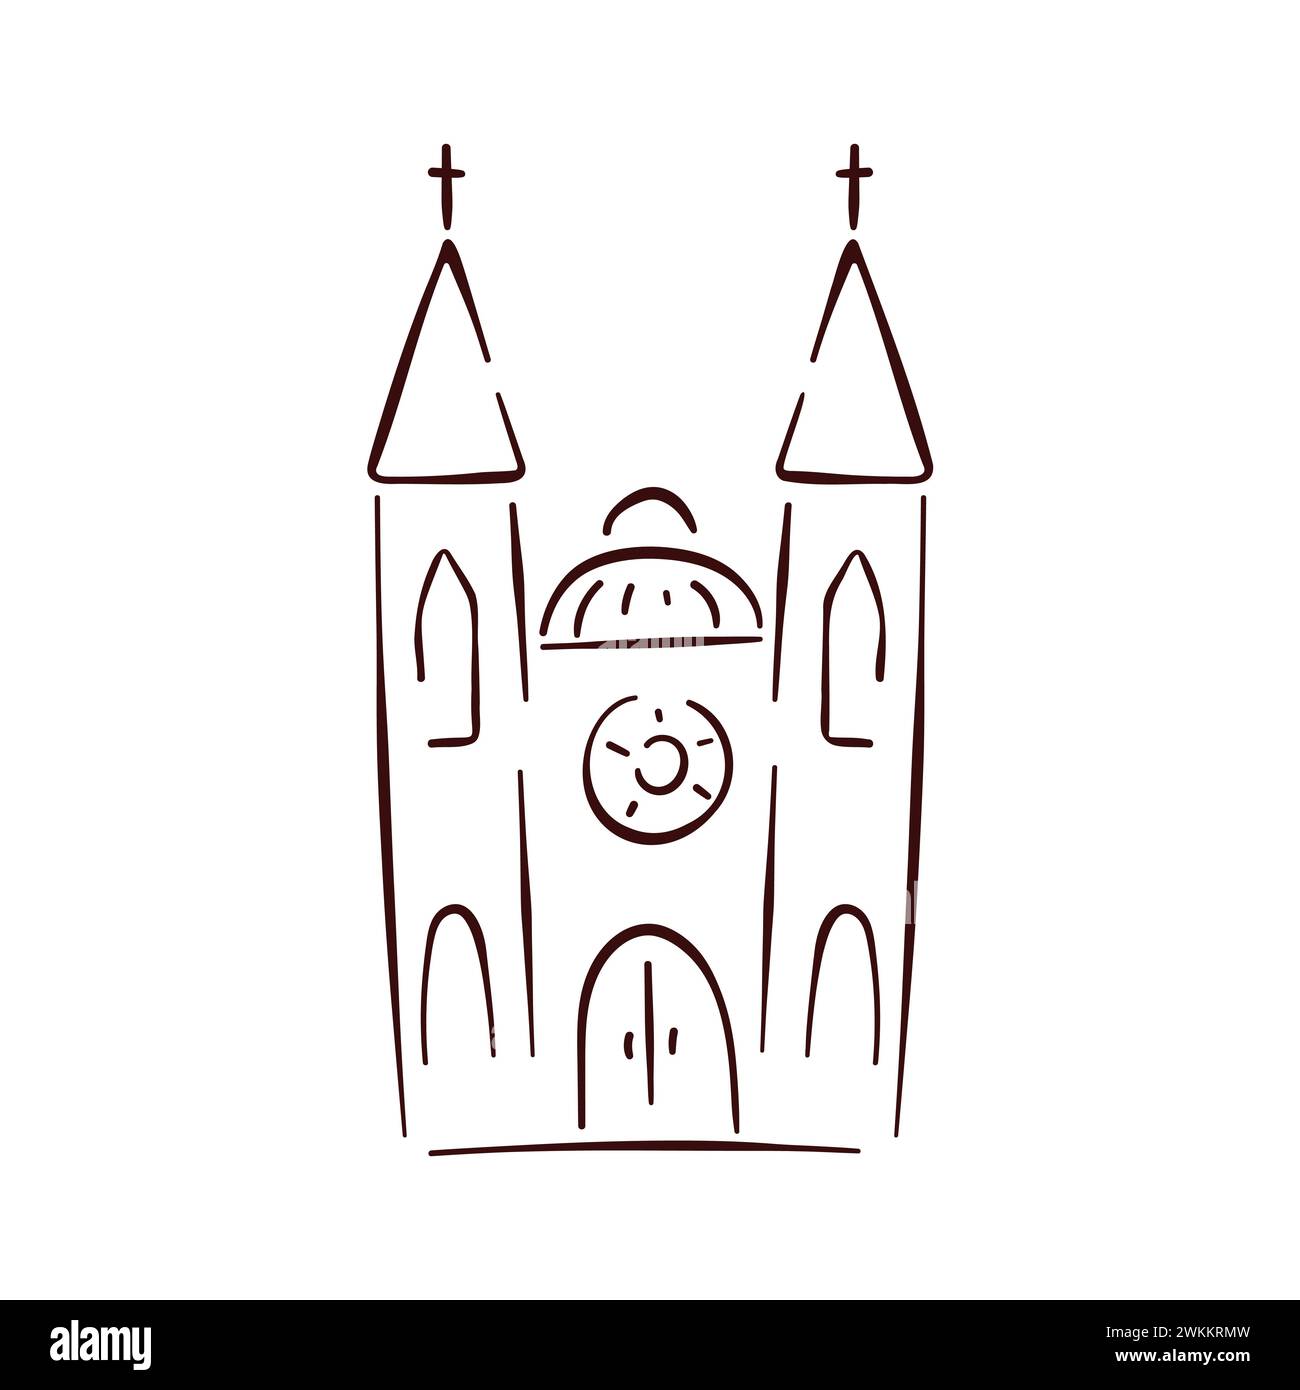 Cathedral building icon in line art style. Church simple hand drawn logo design. Vector illustration isolated on a white background. Stock Vector